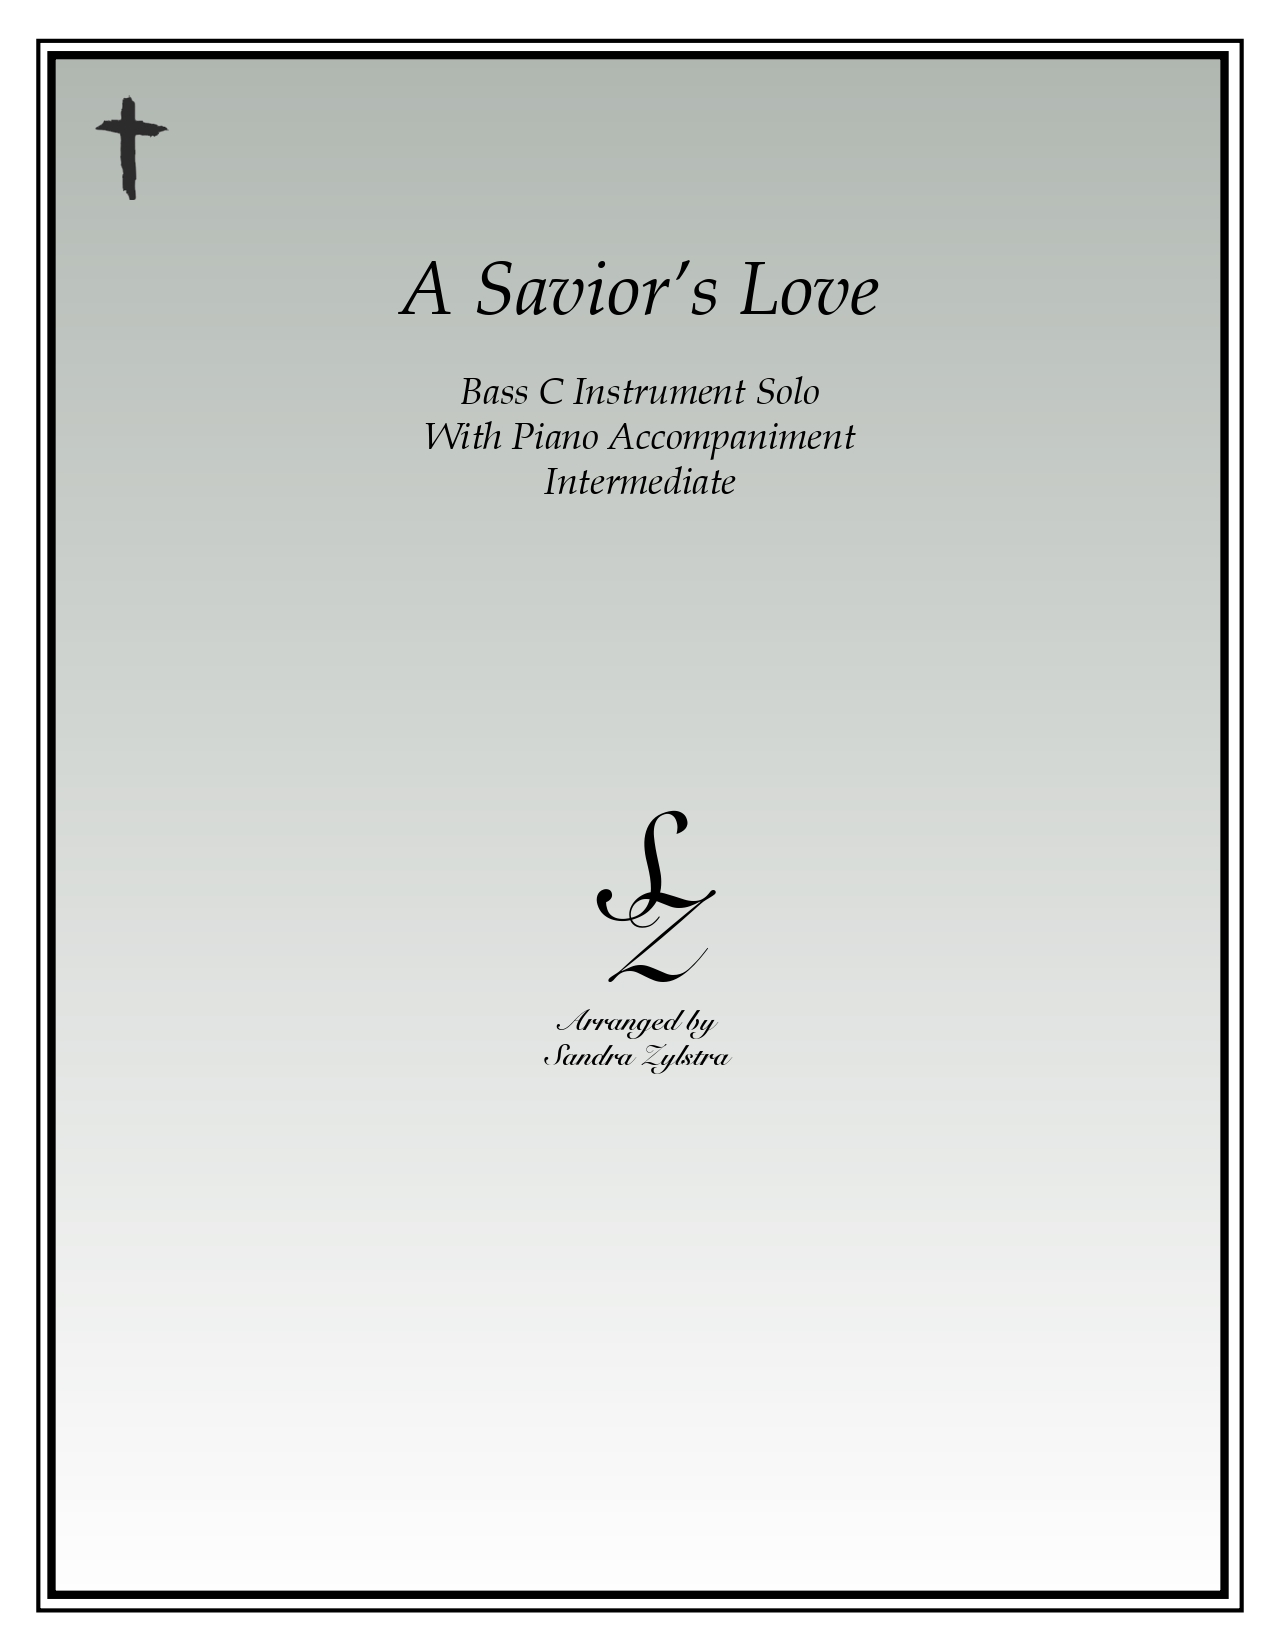 A Saviors Love bass C instrument solo part cover page 00011